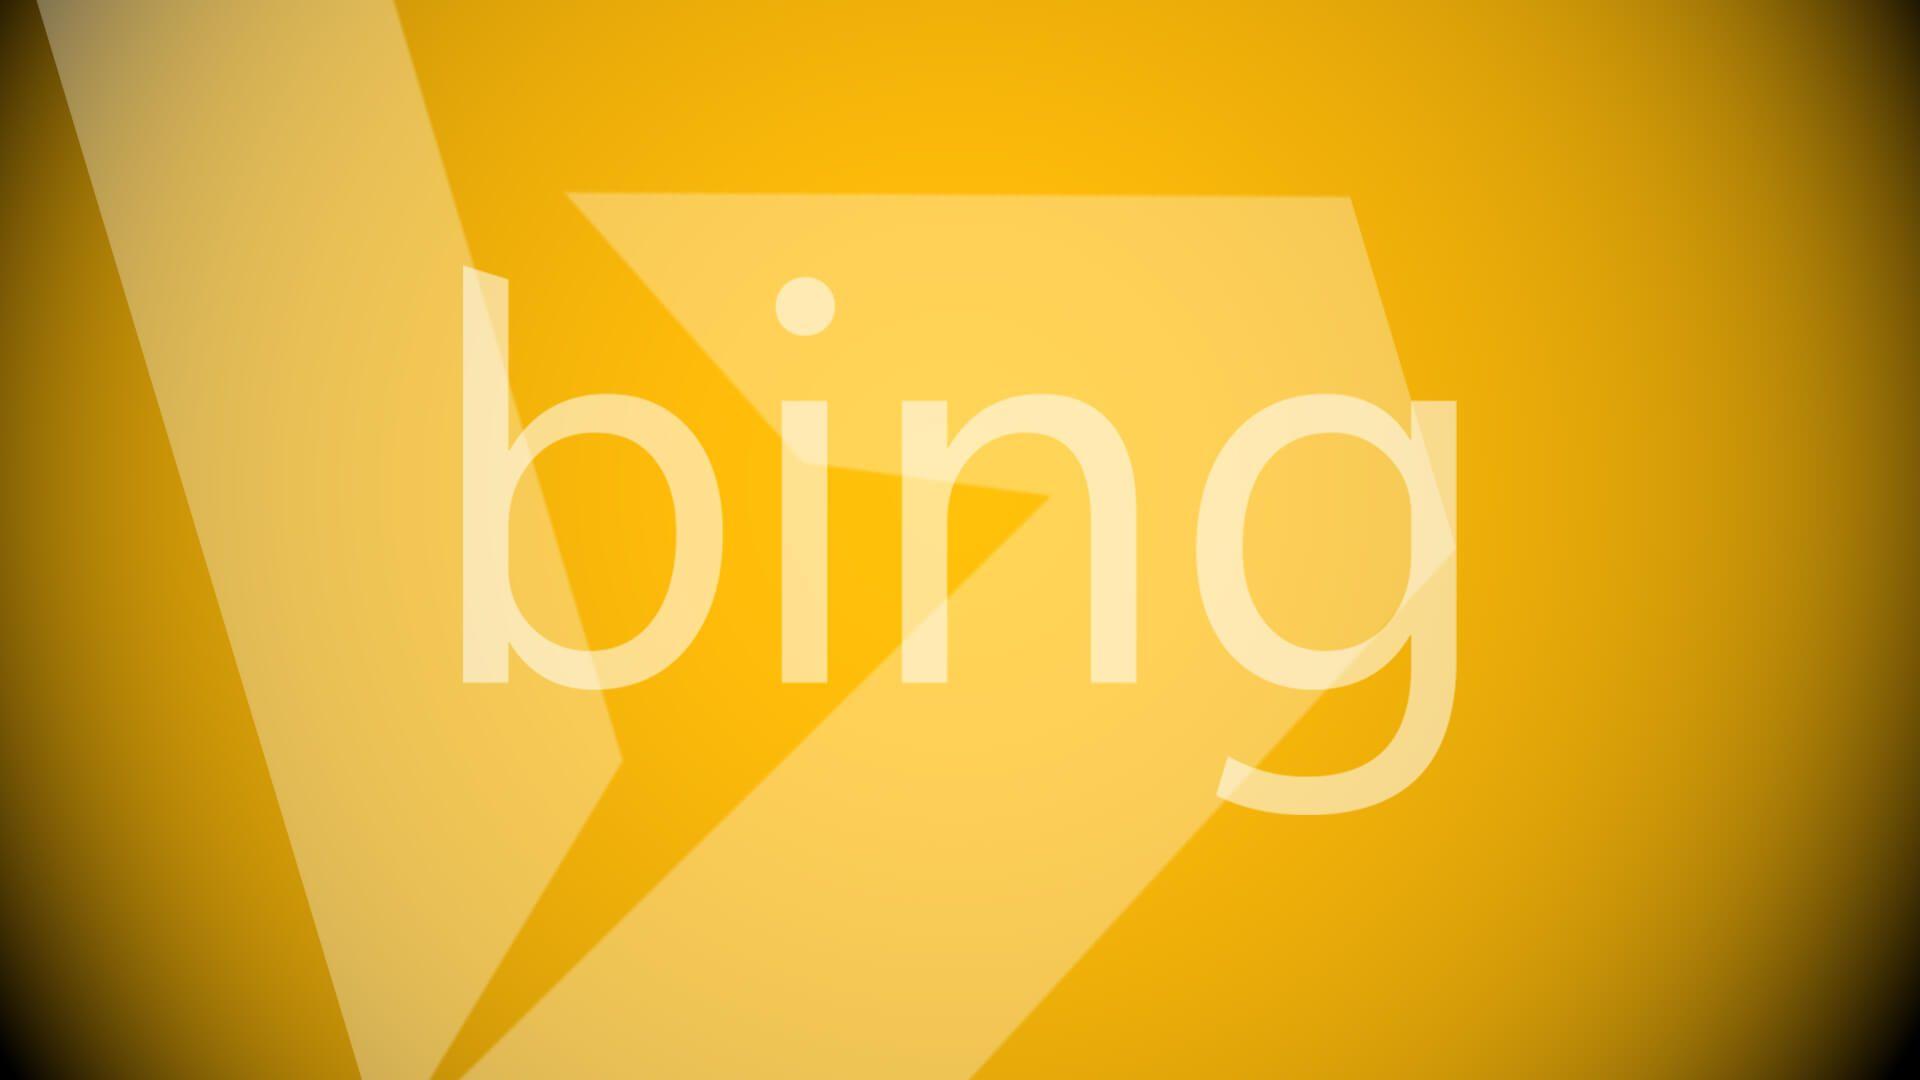 Bing Ultimate Logo - The Ultimate Guide To Bing Webmaster Tools - Search Engine Land